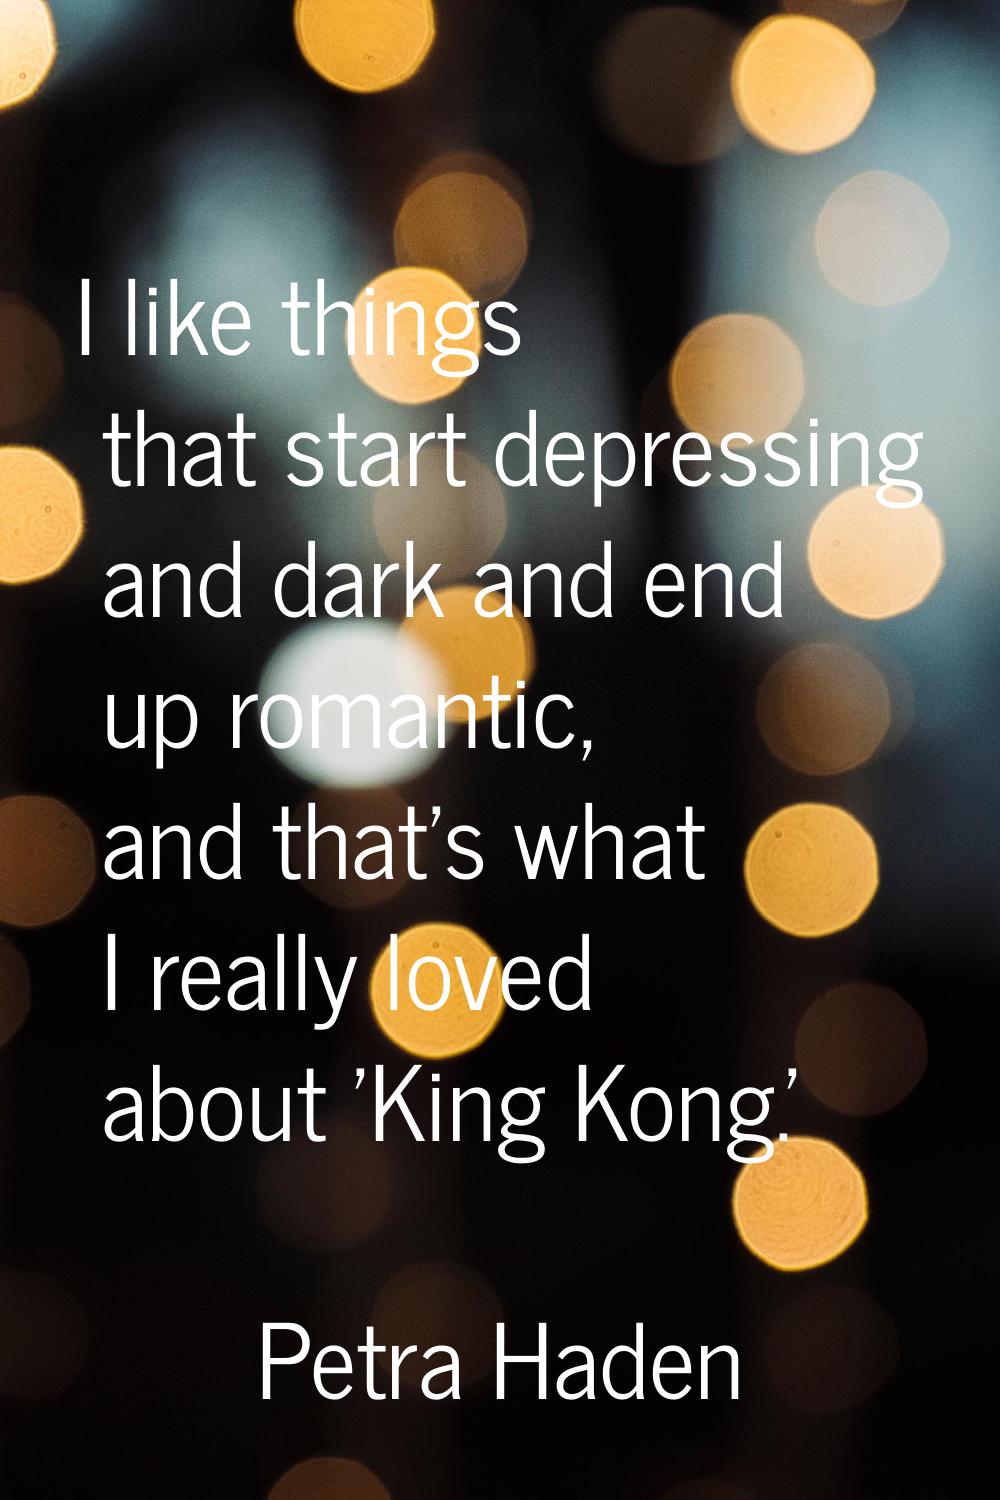 I like things that start depressing and dark and end up romantic, and that's what I really loved ab